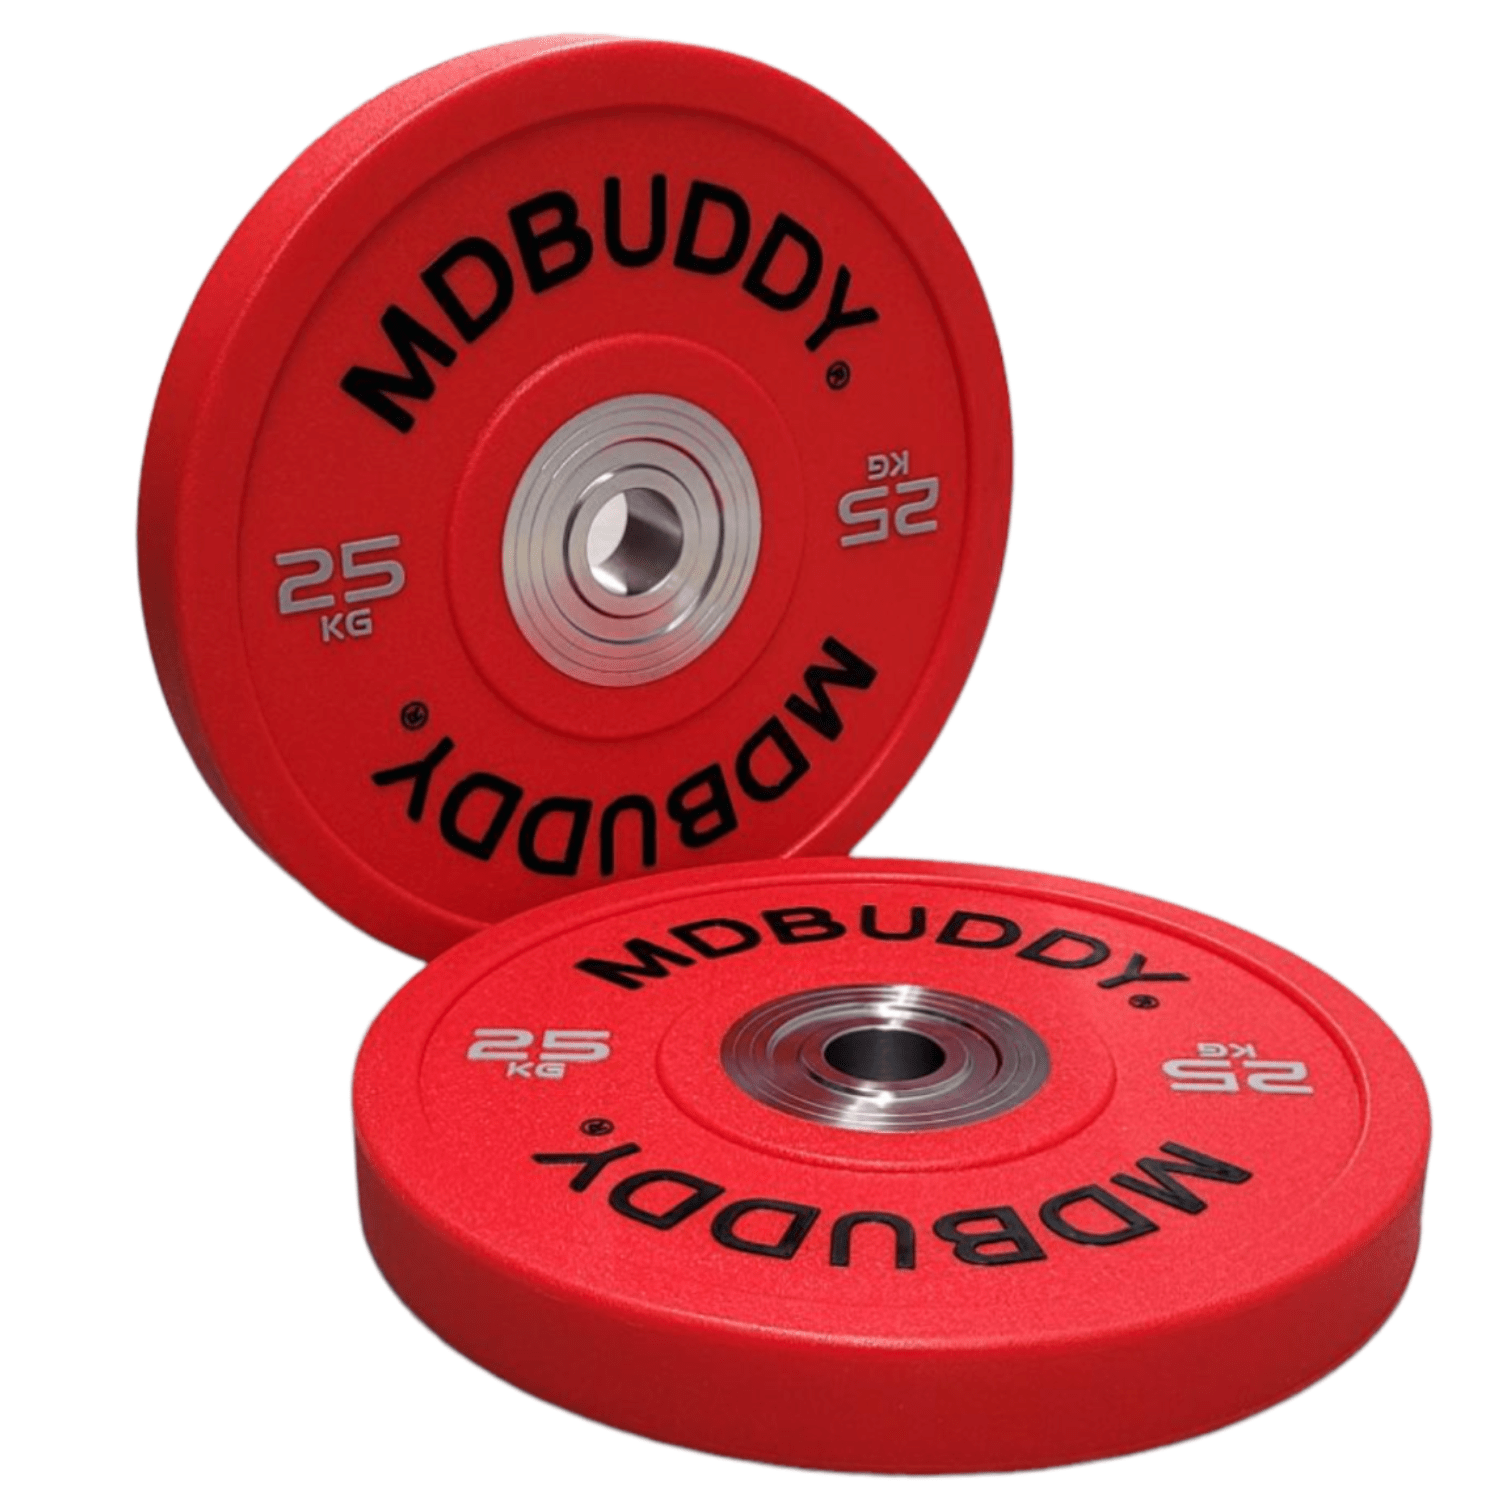 MD Buddy Commercial Urethane Competition Bumper Plate-Urethane Bumper-Flaman Fitness-5